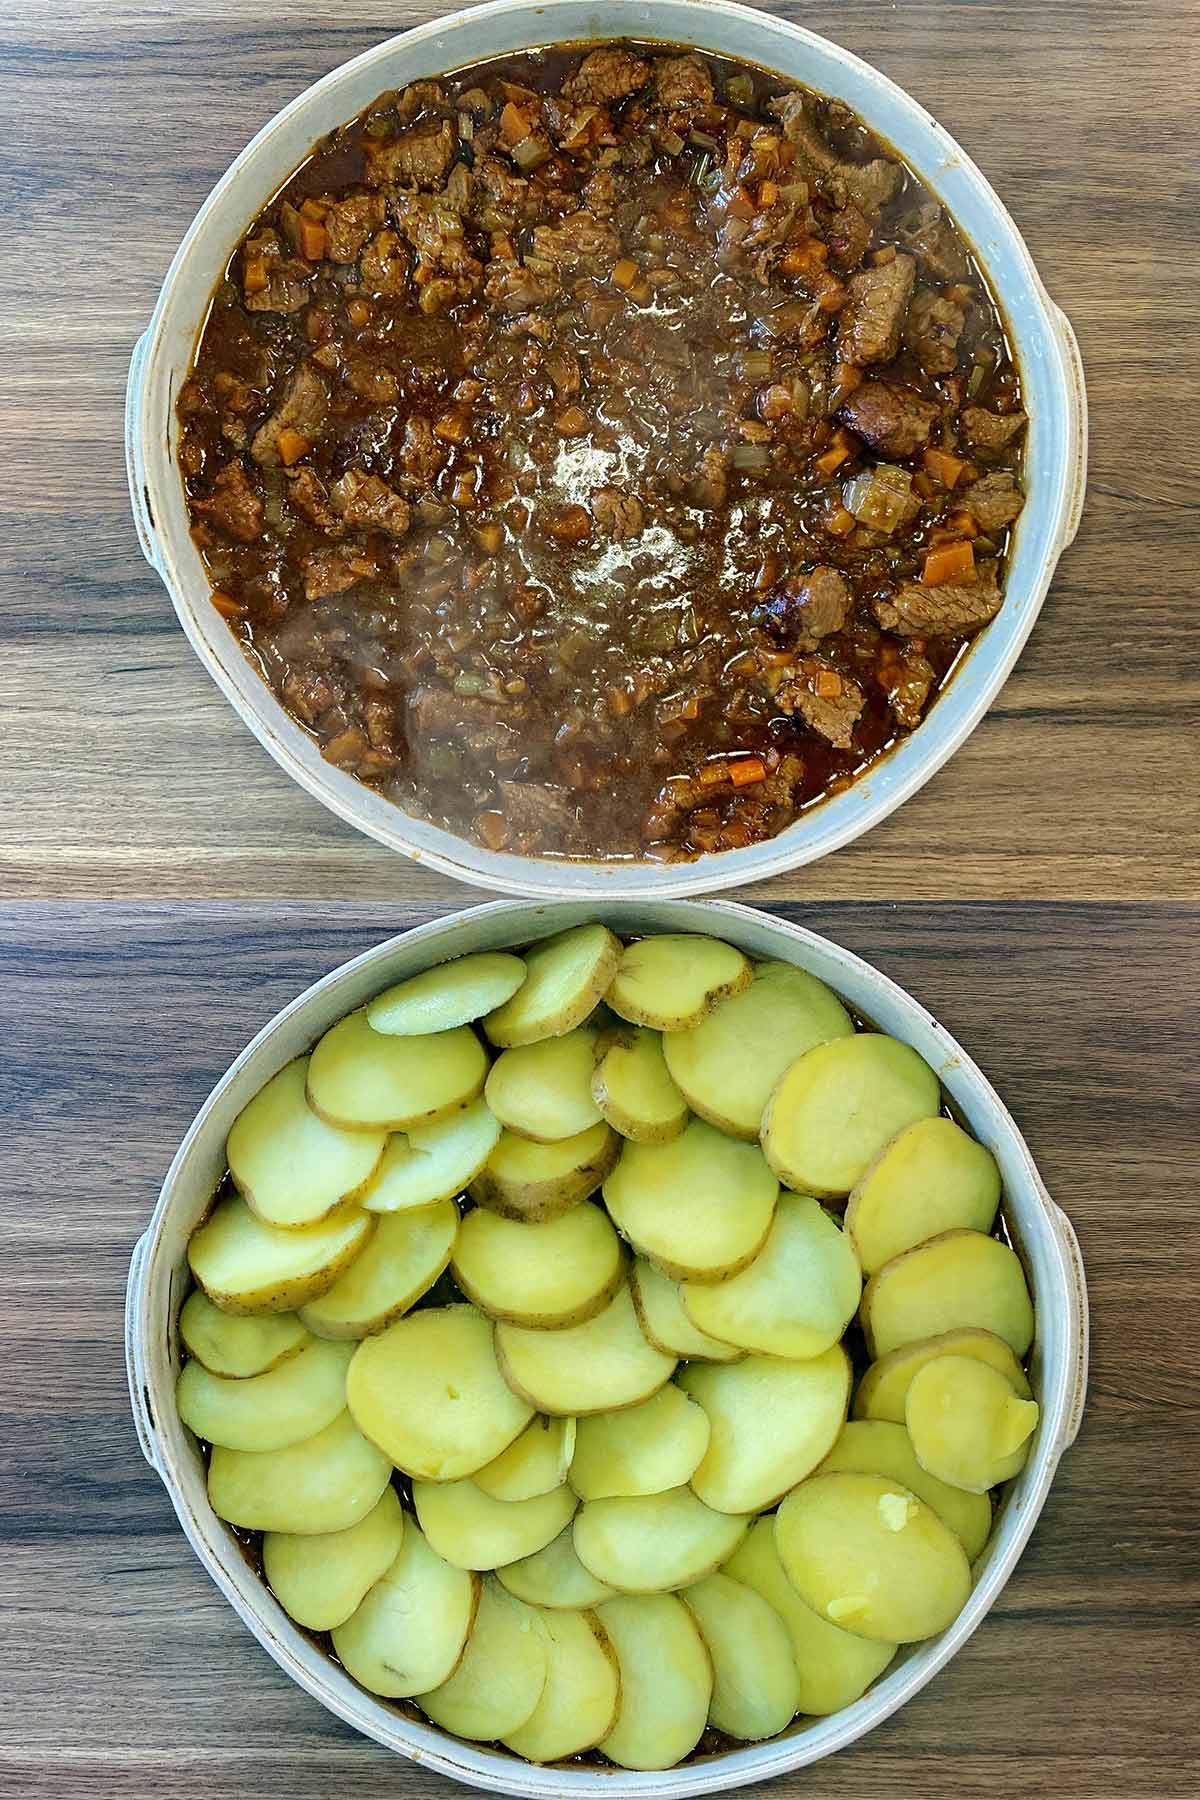 The beef mixture in a large baking dish, then covered in sliced potatoes.